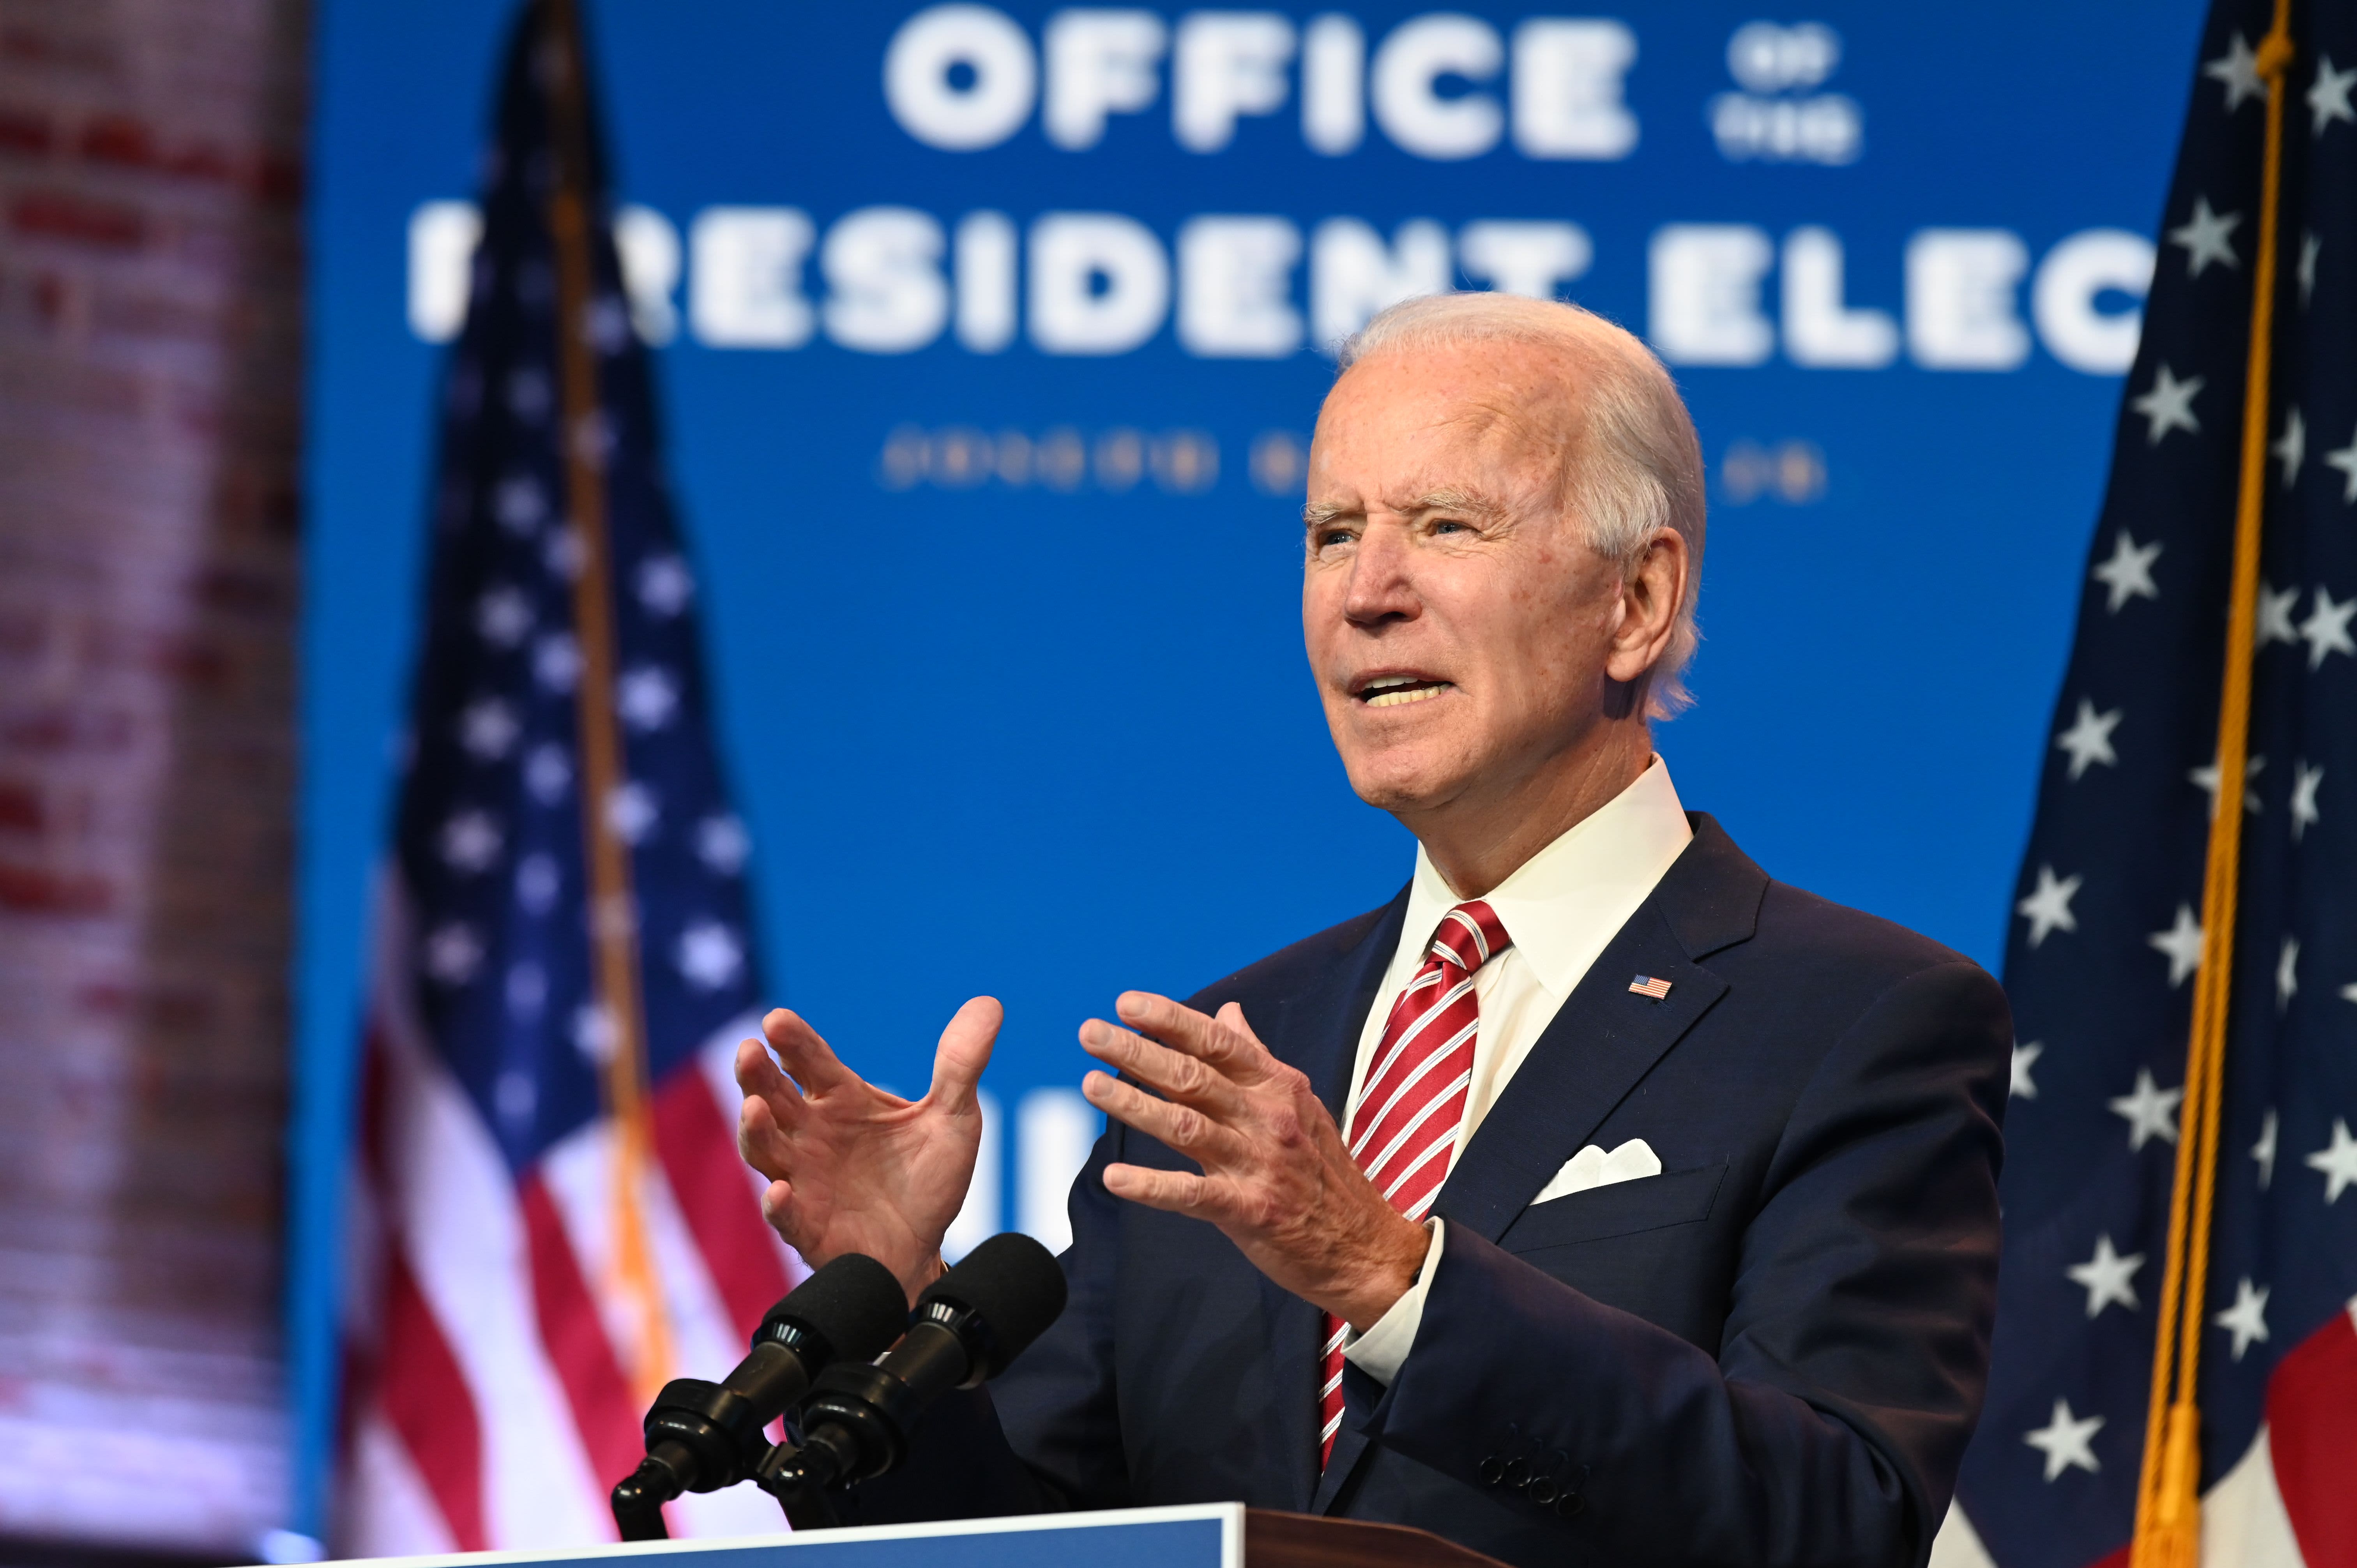 Biden will announce first Cabinet picks on Tuesday: chief of staff